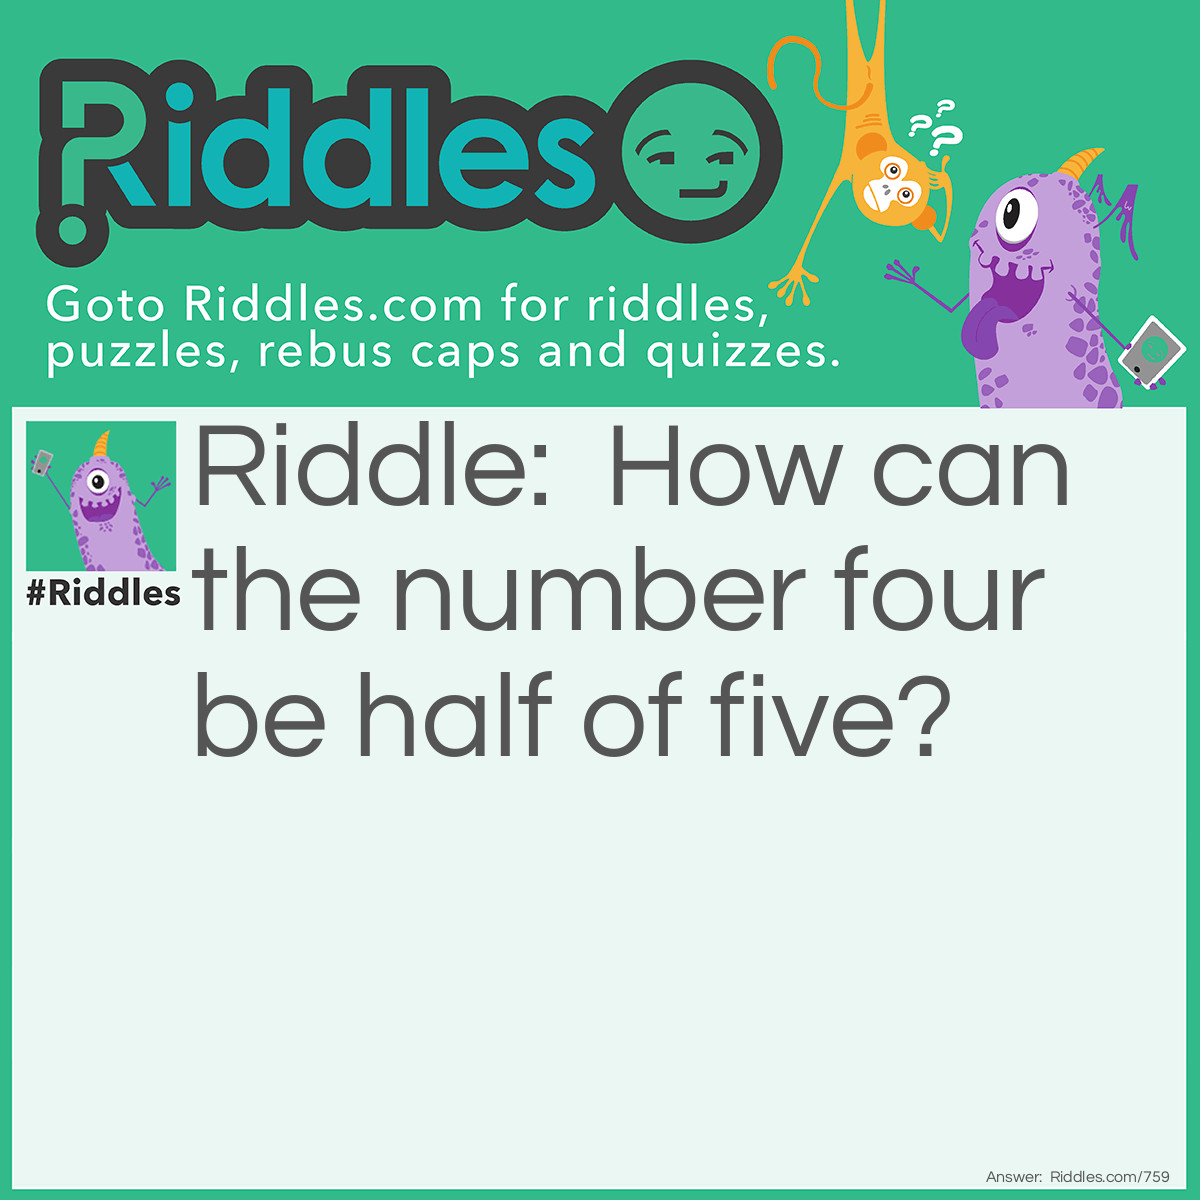 Riddle: Four is half of five.
True or false? Answer: It's true. Think roman numerals.